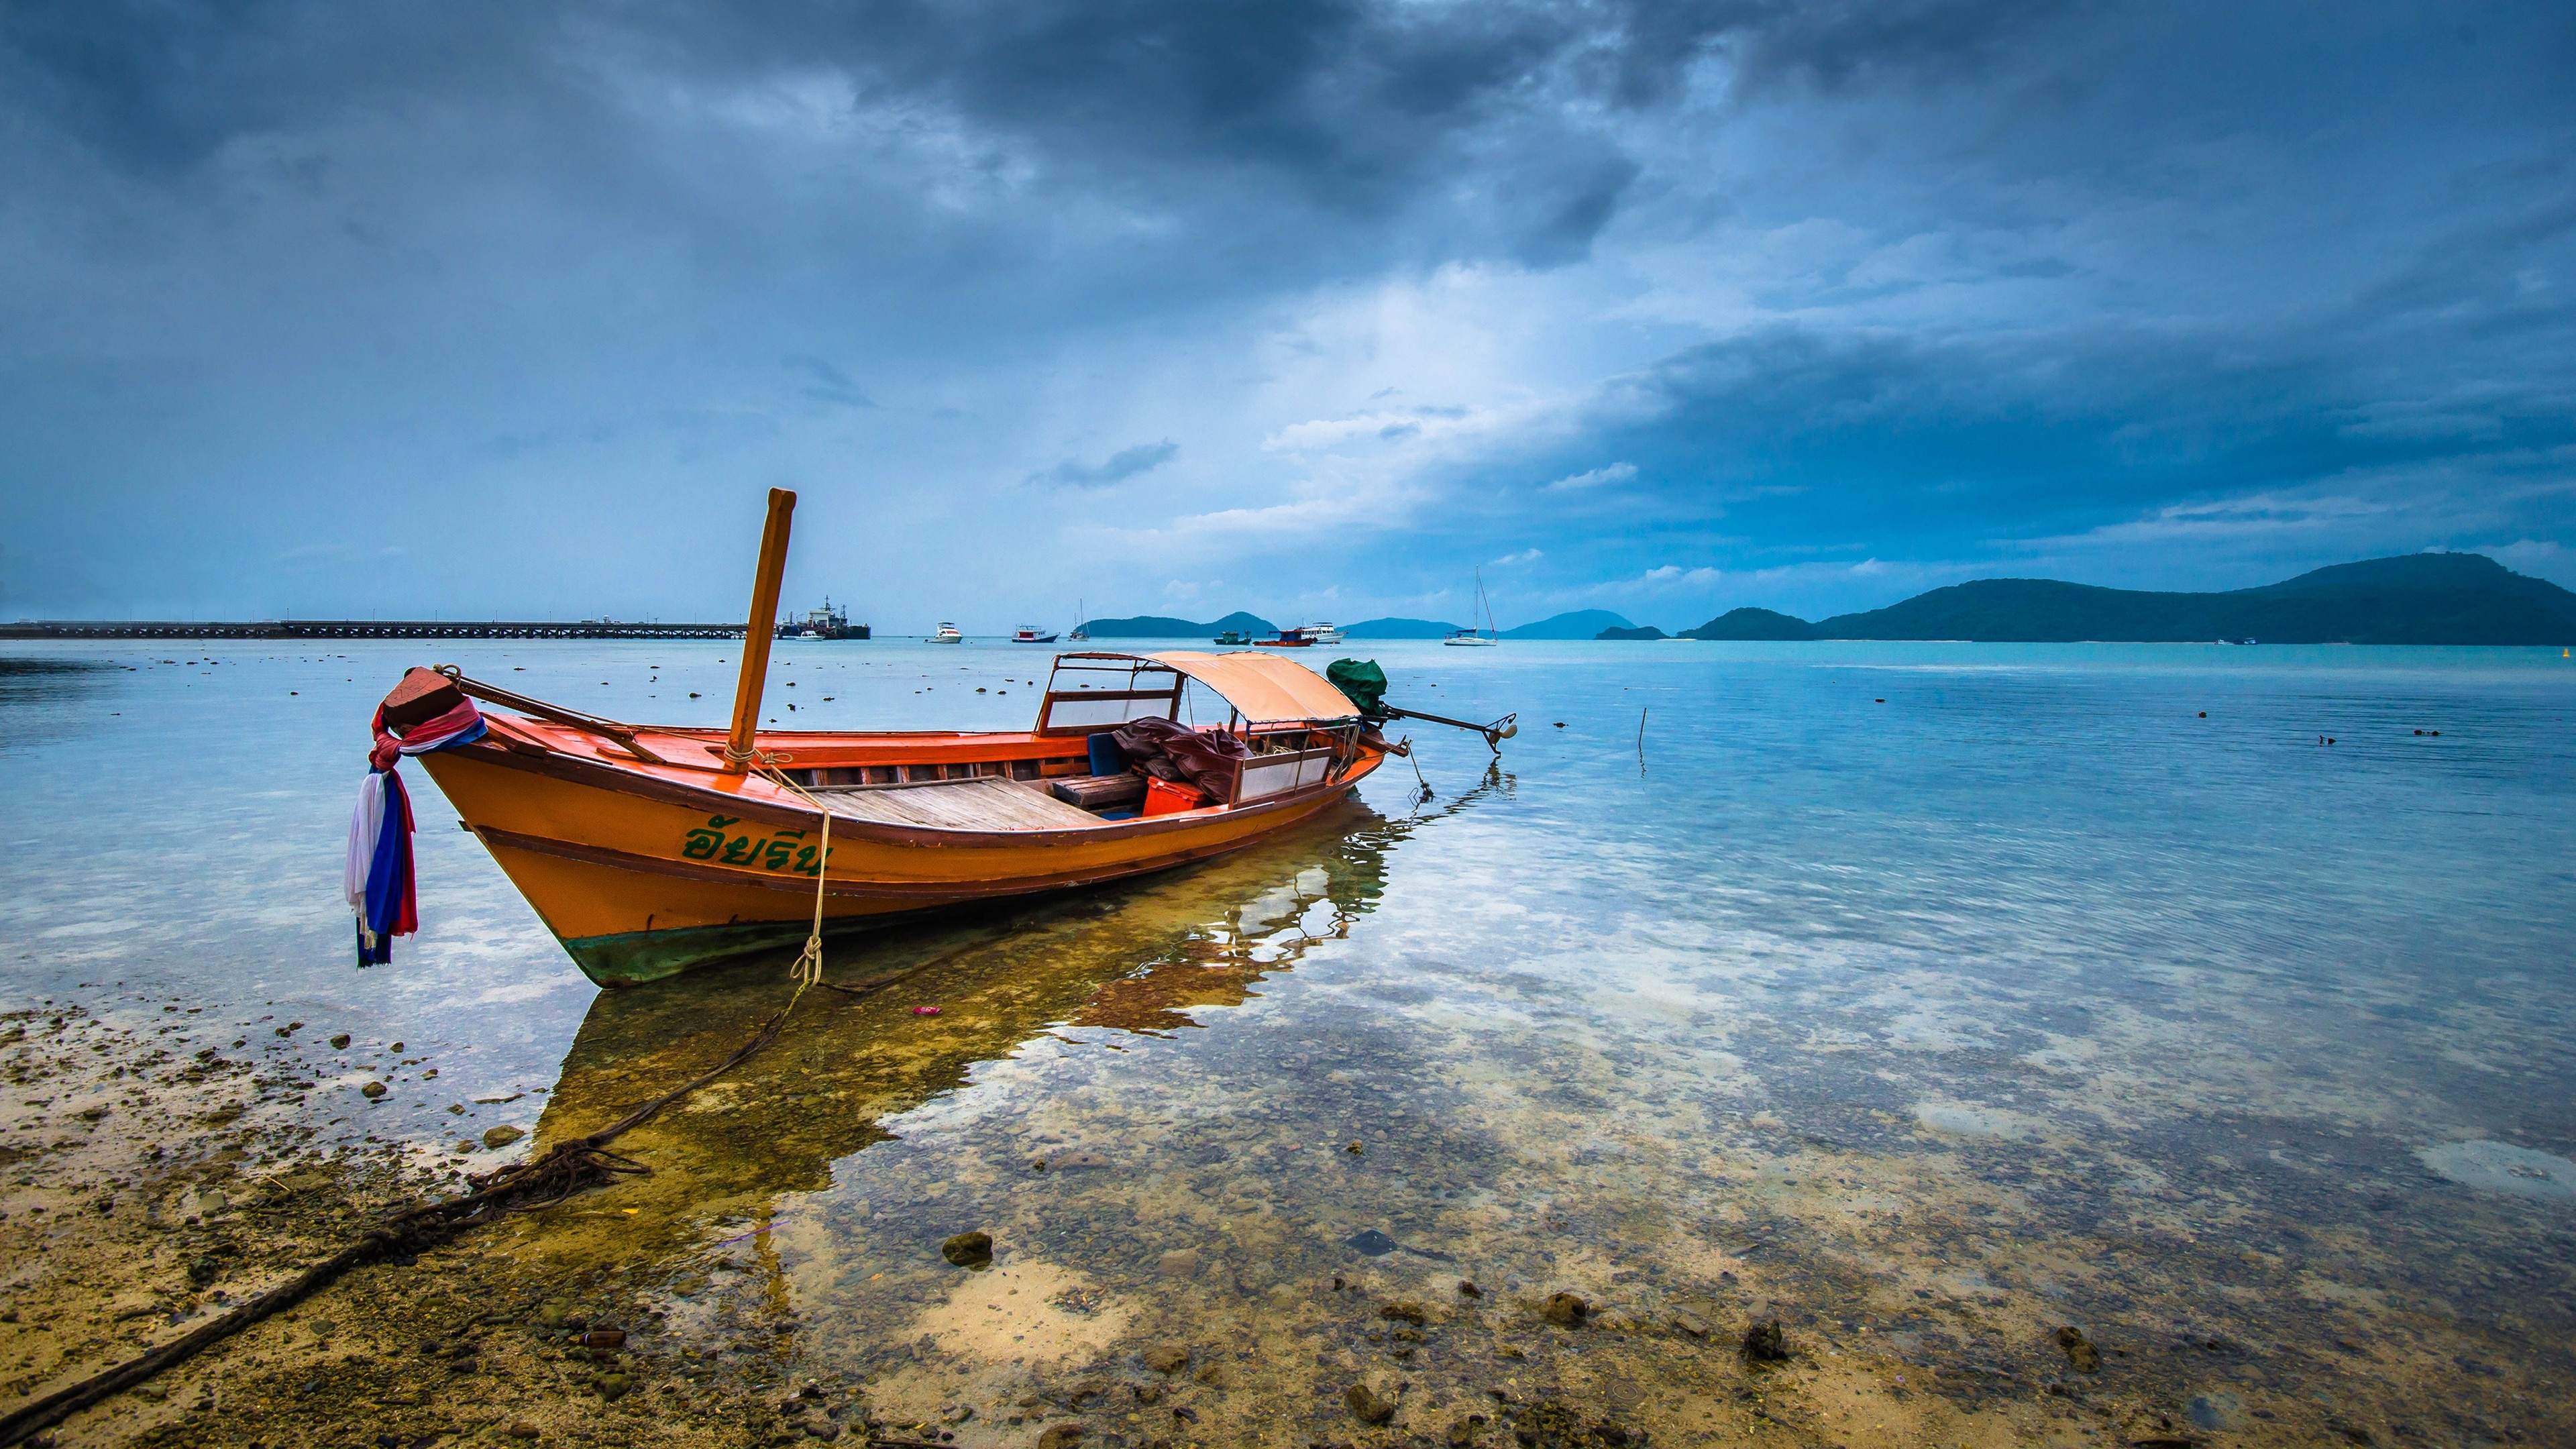 Boat: Thailand, Have served as marine transportation far into pre-historic times. 3840x2160 4K Background.